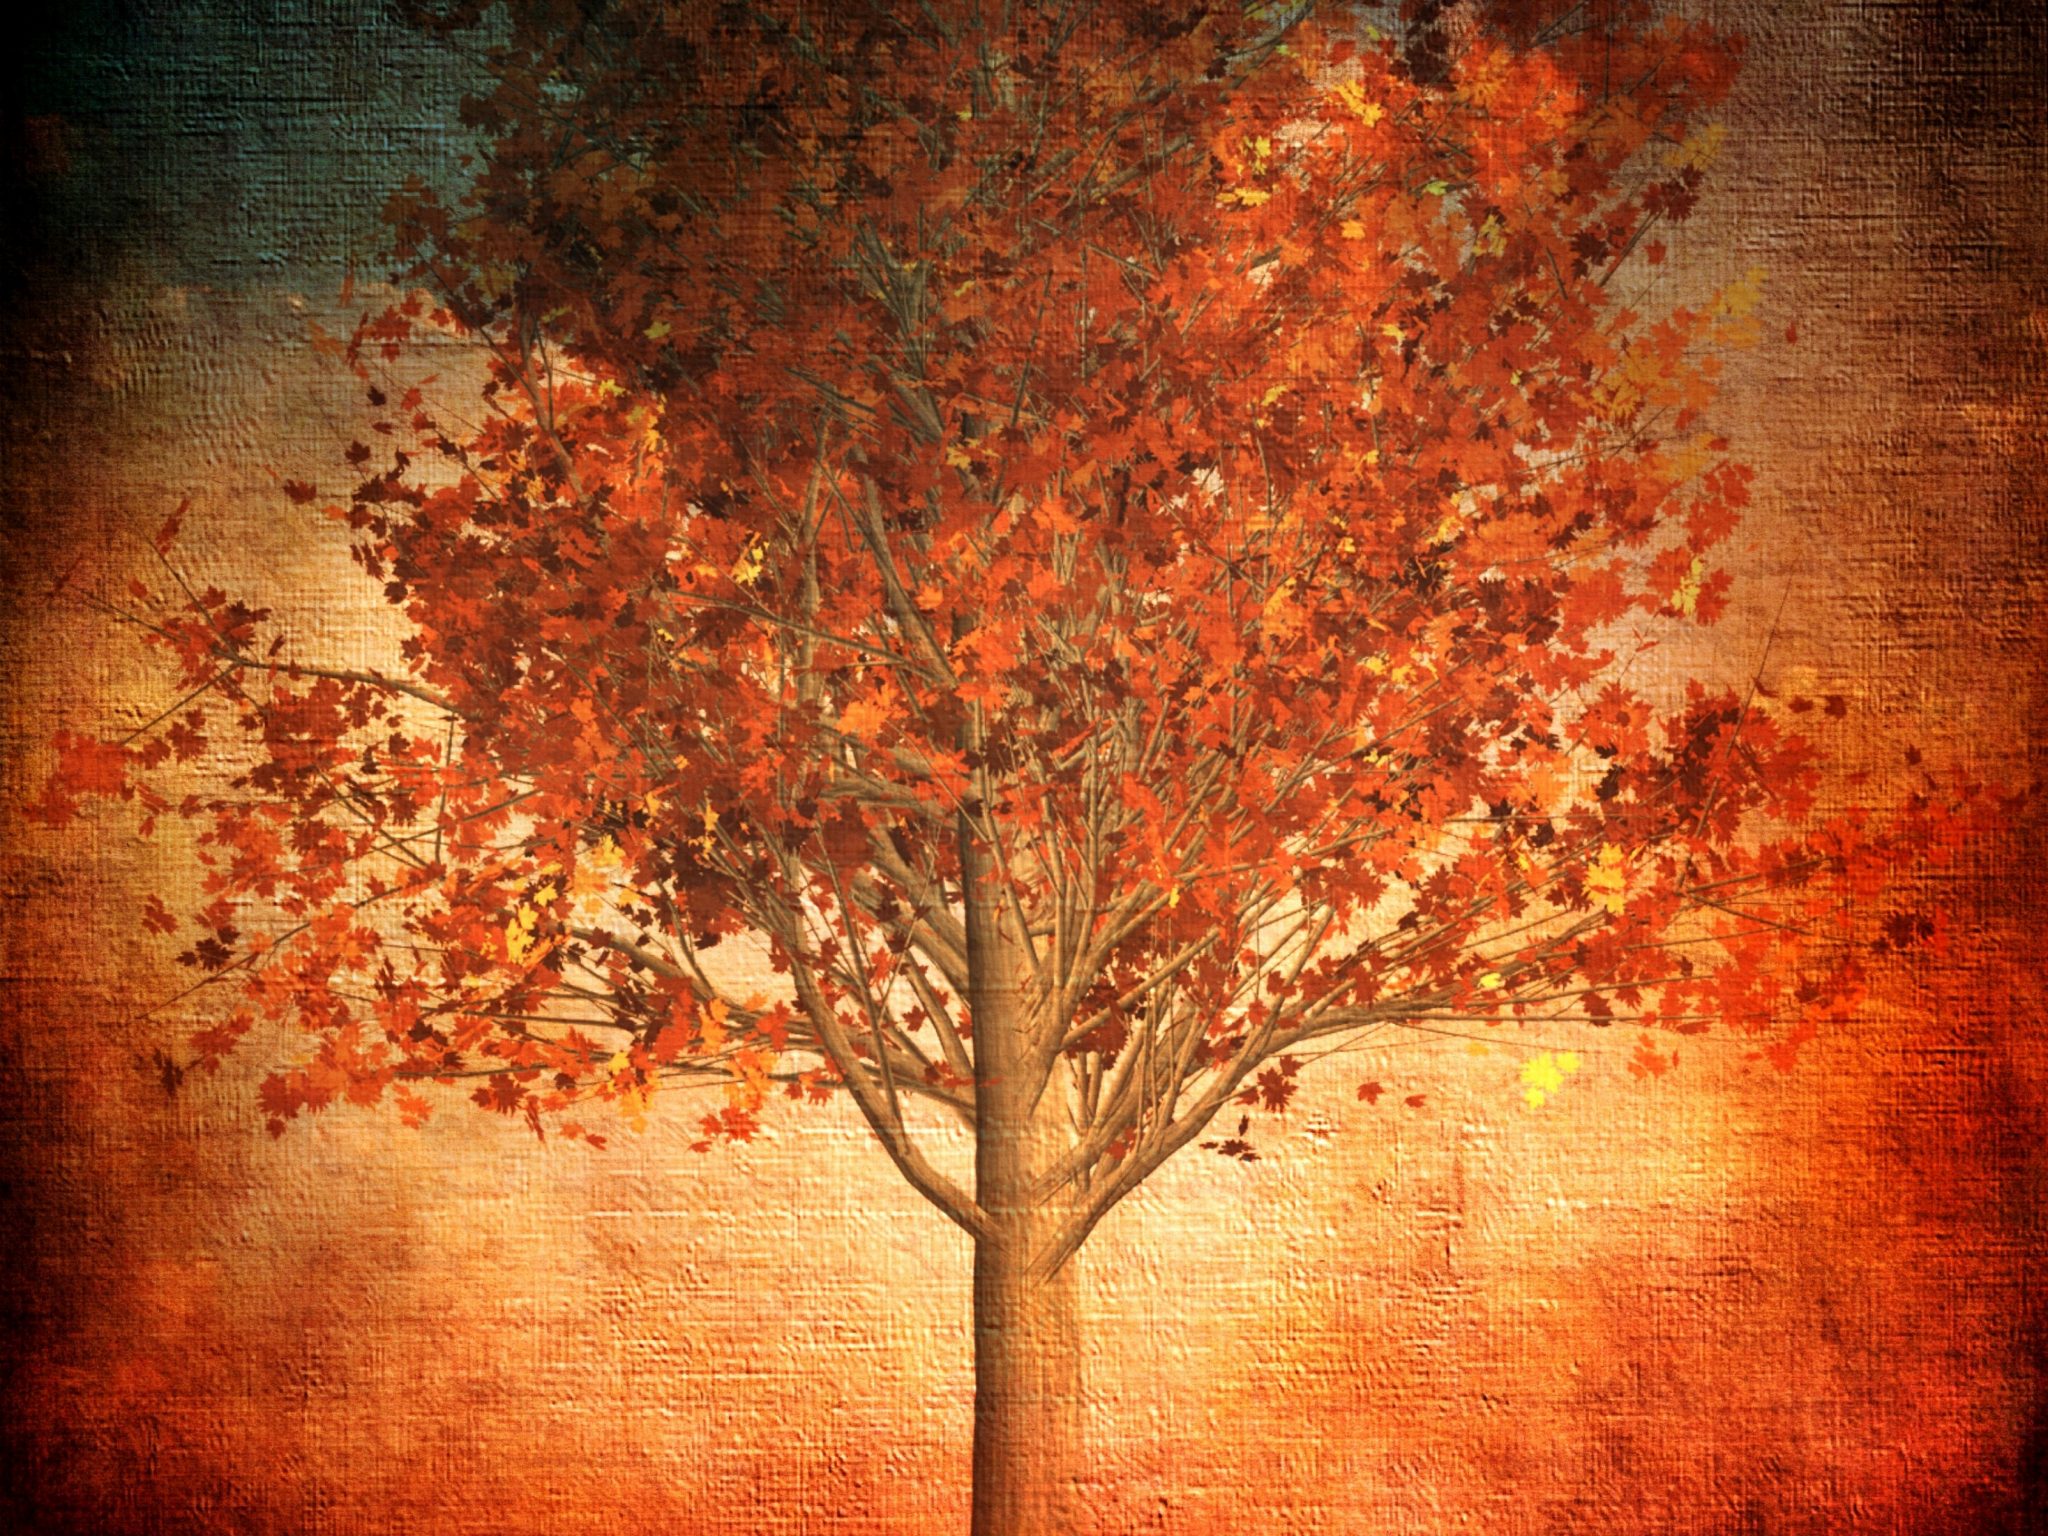 2048x1536 wallpaper Aesthetic Autumn Red Fall Leaves Nature iPad Wallpaper 2048x1536 pixels resolution